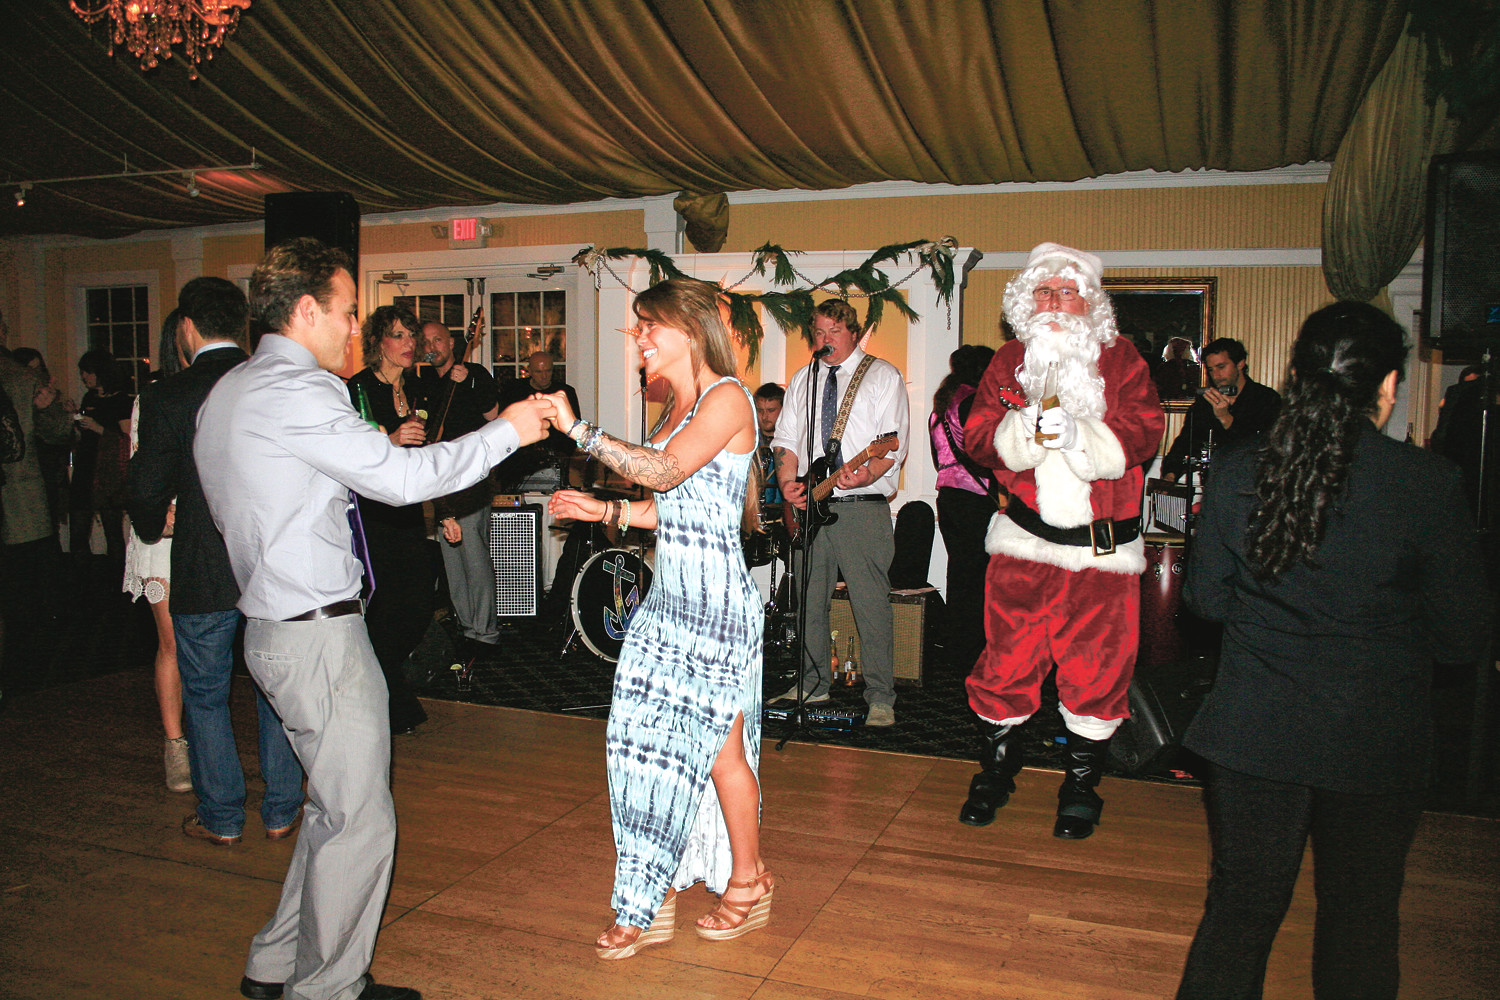 Luke Vexler and Alesha Forche danced to the music of Ground Swell at last year’s dinner.